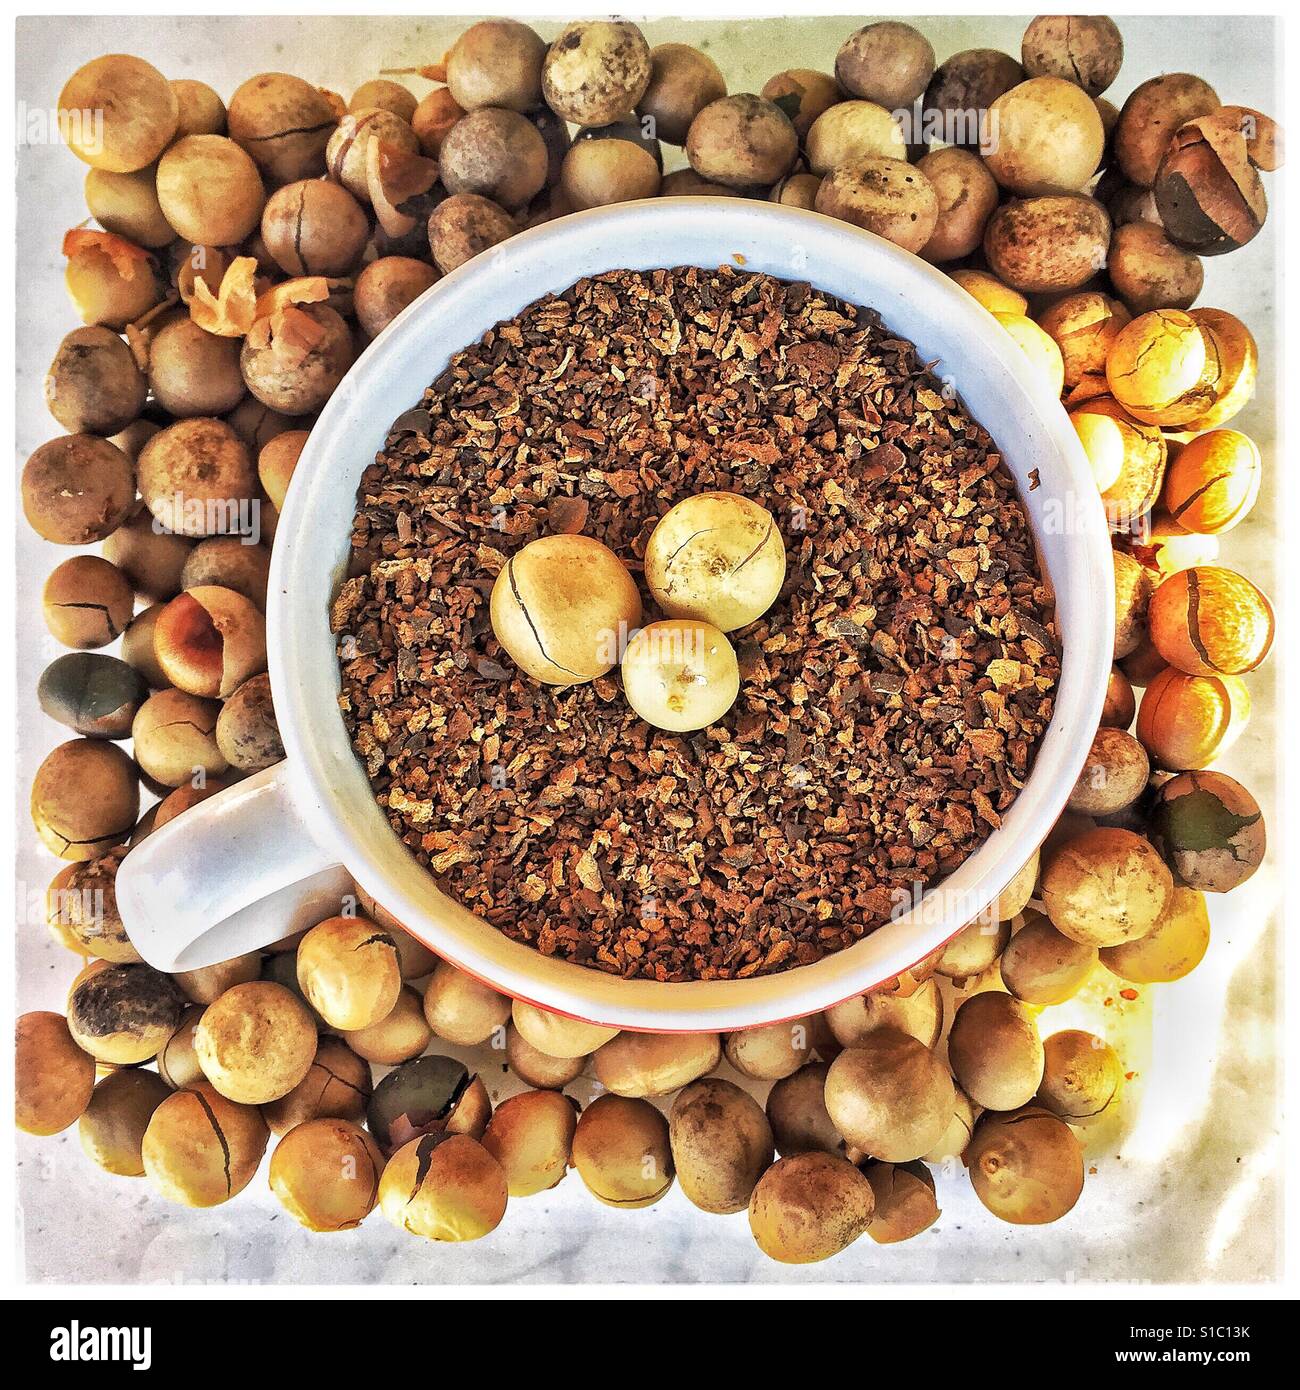 Capomo Also Known As Mayan Seed Or Maya Nut Is Roasted And Ground For A Delicious Coffee